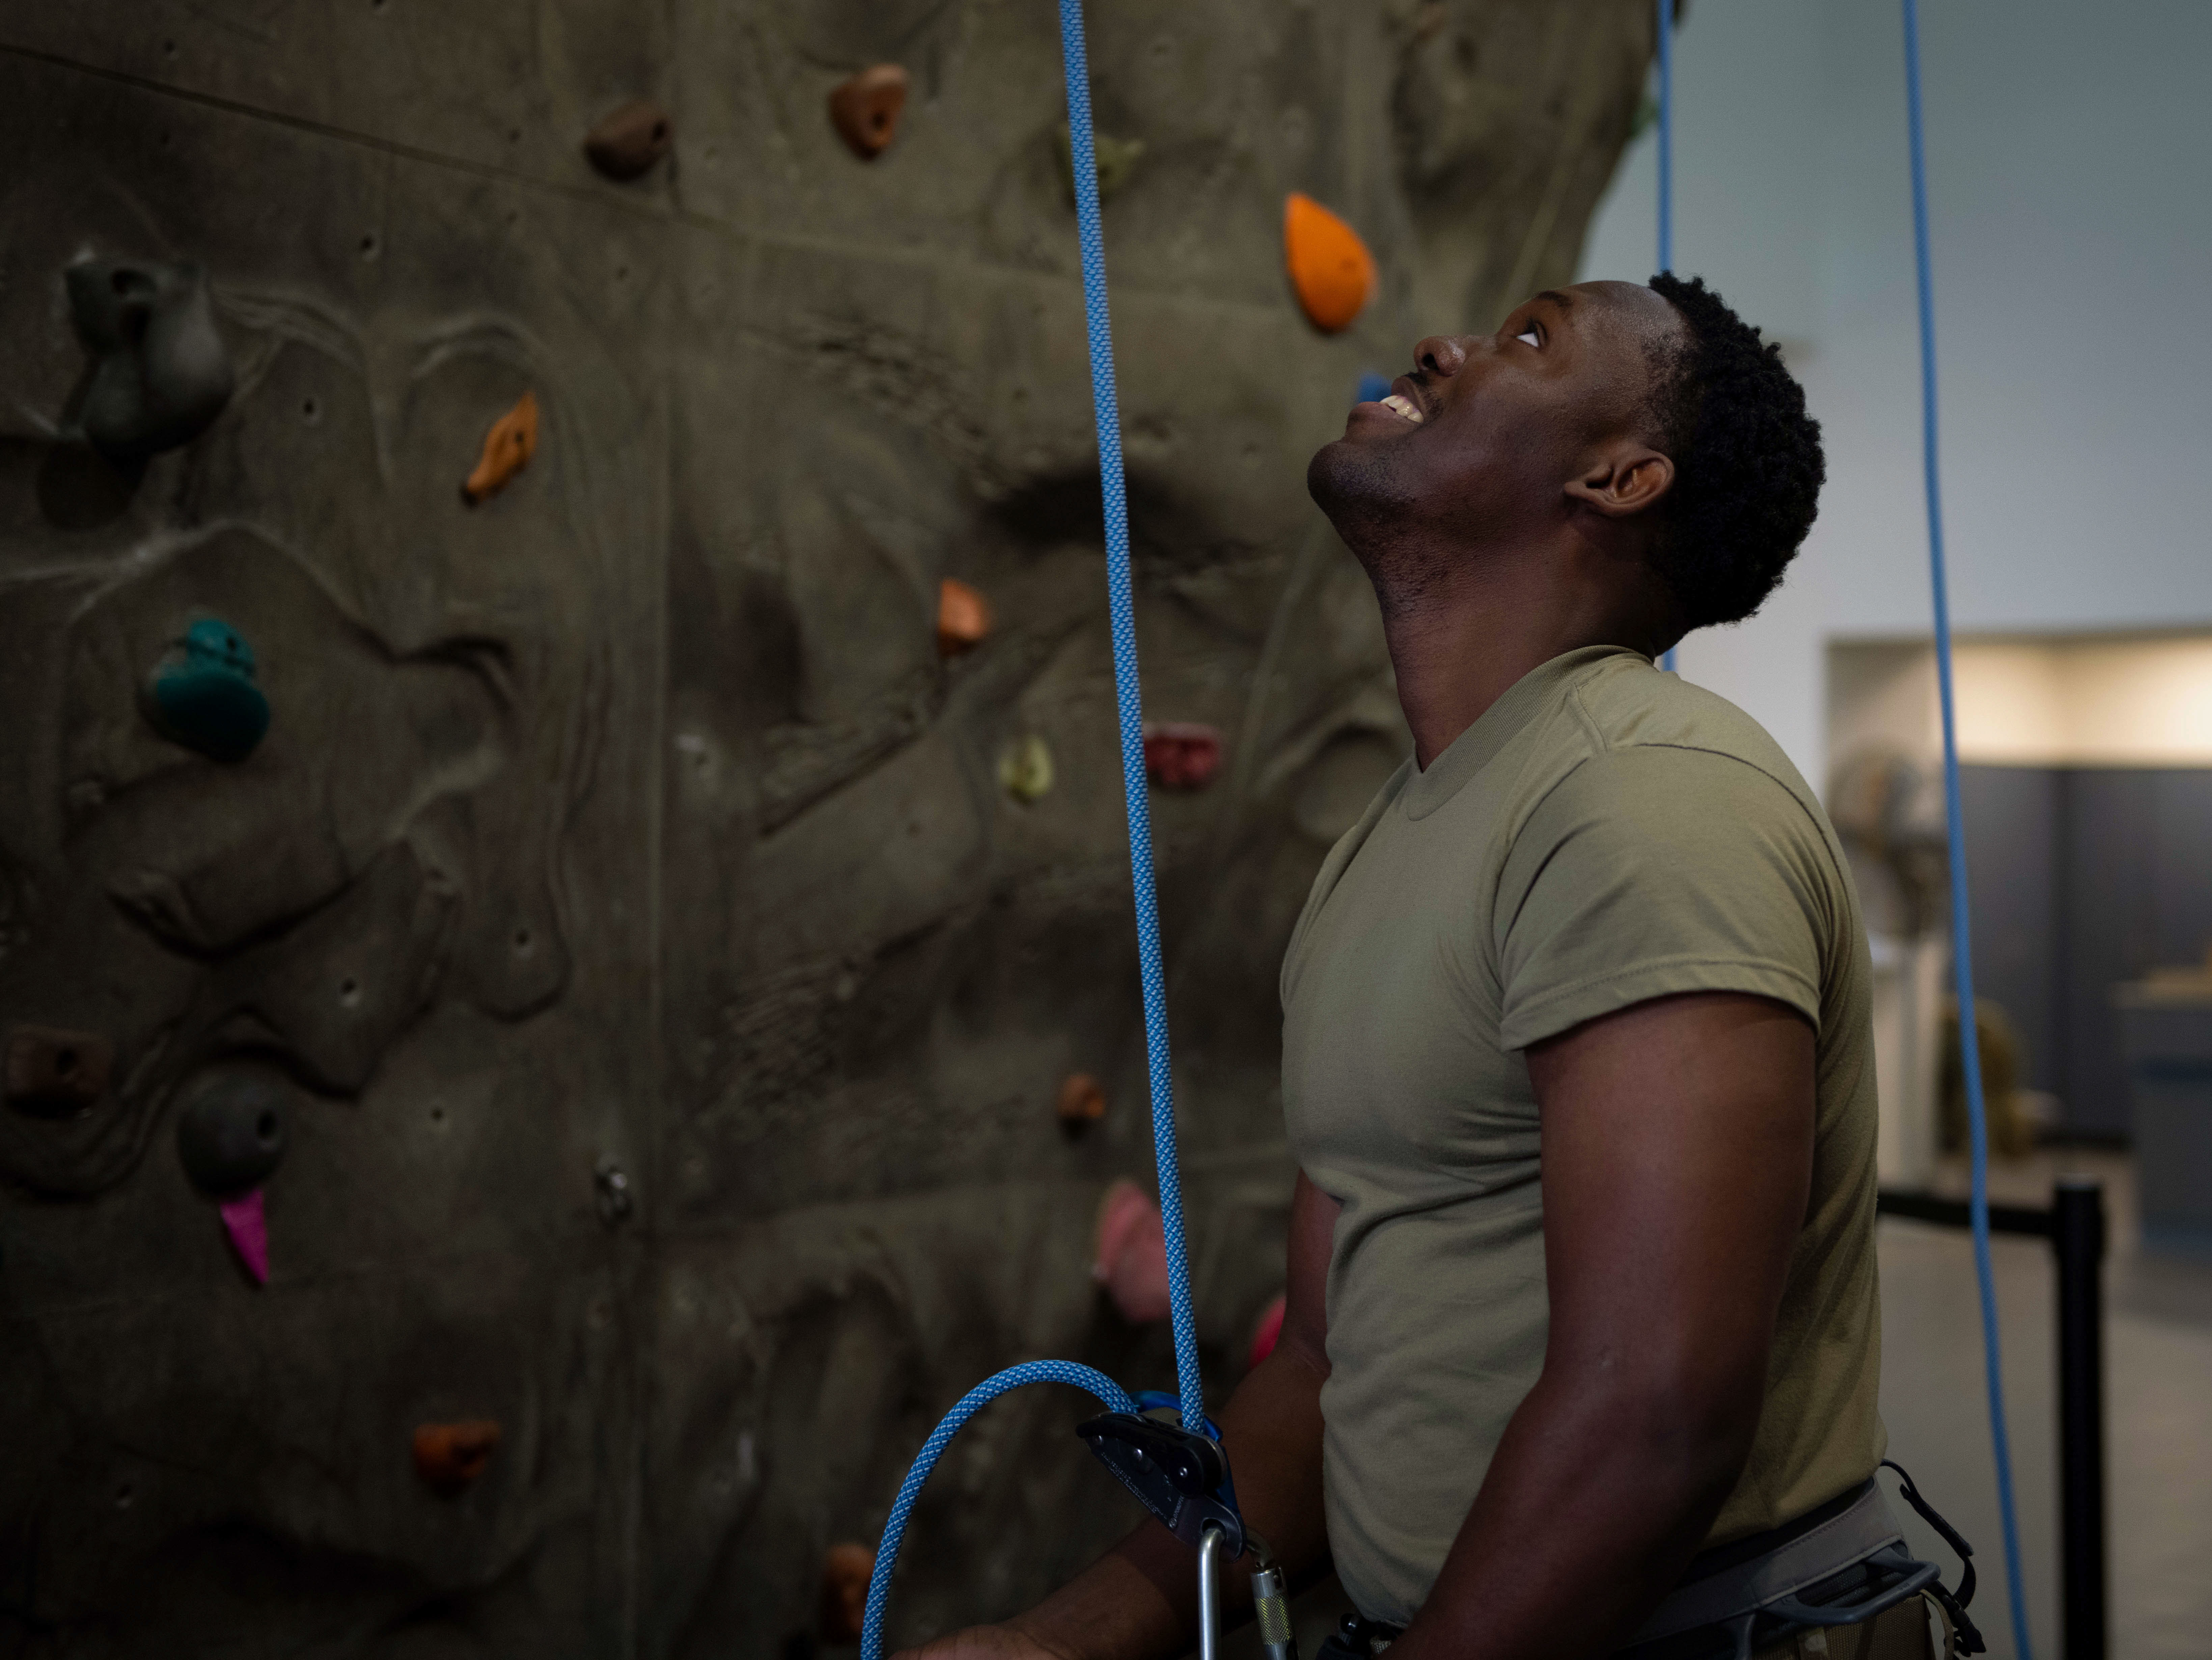 I originally started wall climbing at the gym to help strengthen my upper  body, but this way ended up being so much easier.” -Frank, West…